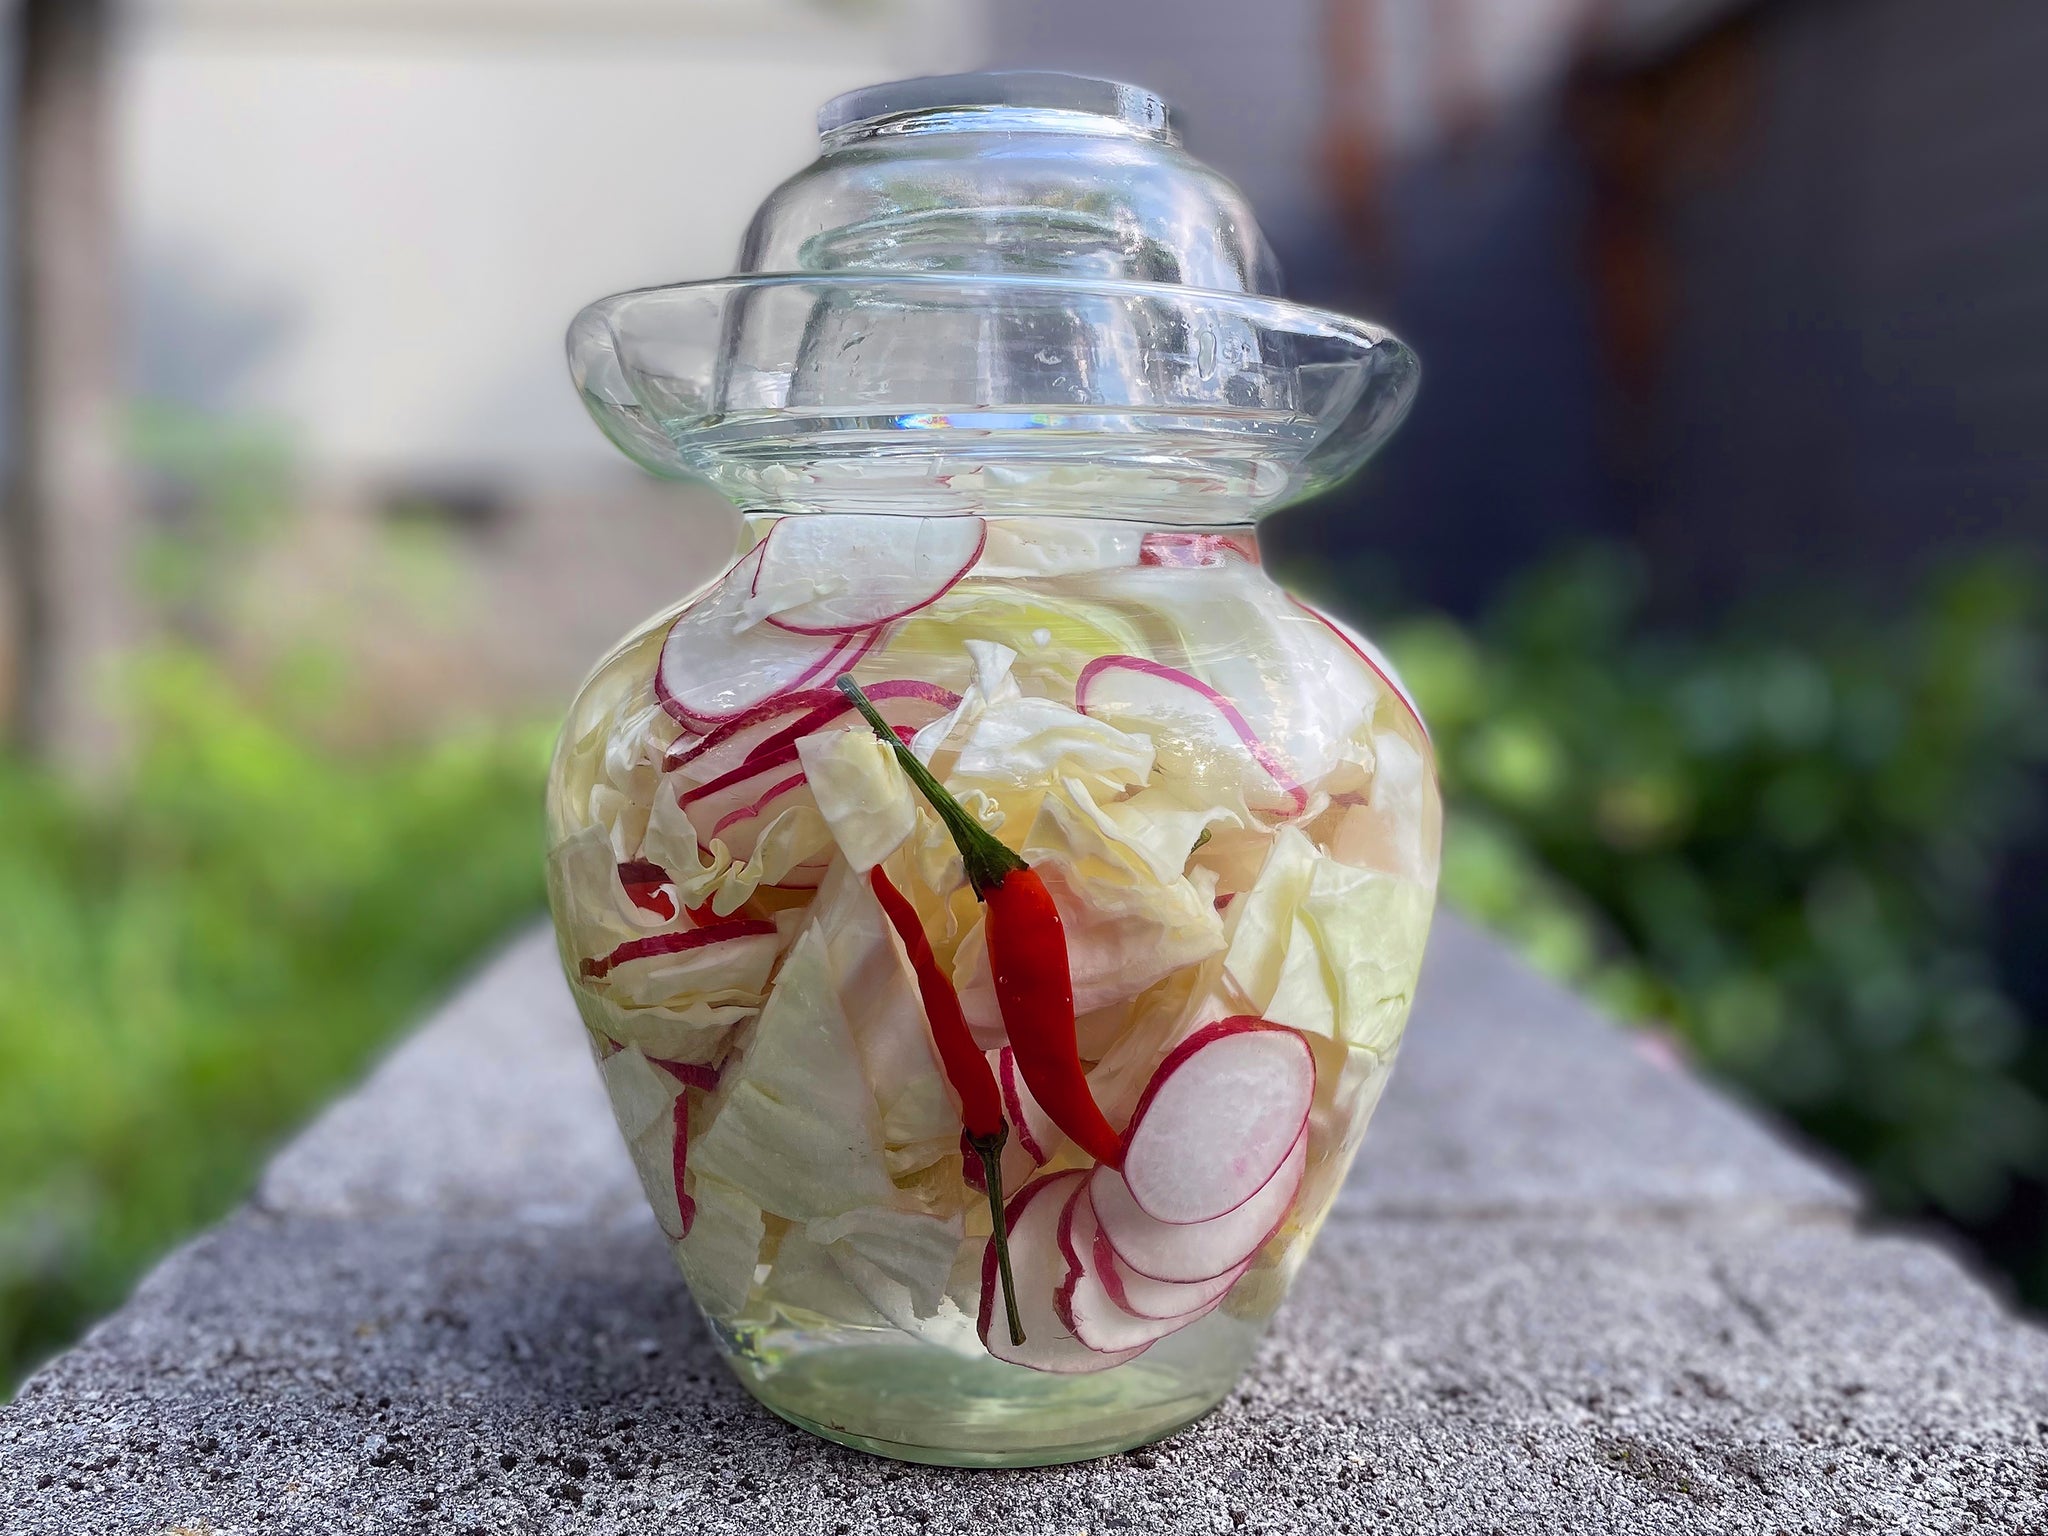 Sichuan Paocai Pickle Jar With Cabbage and Radish